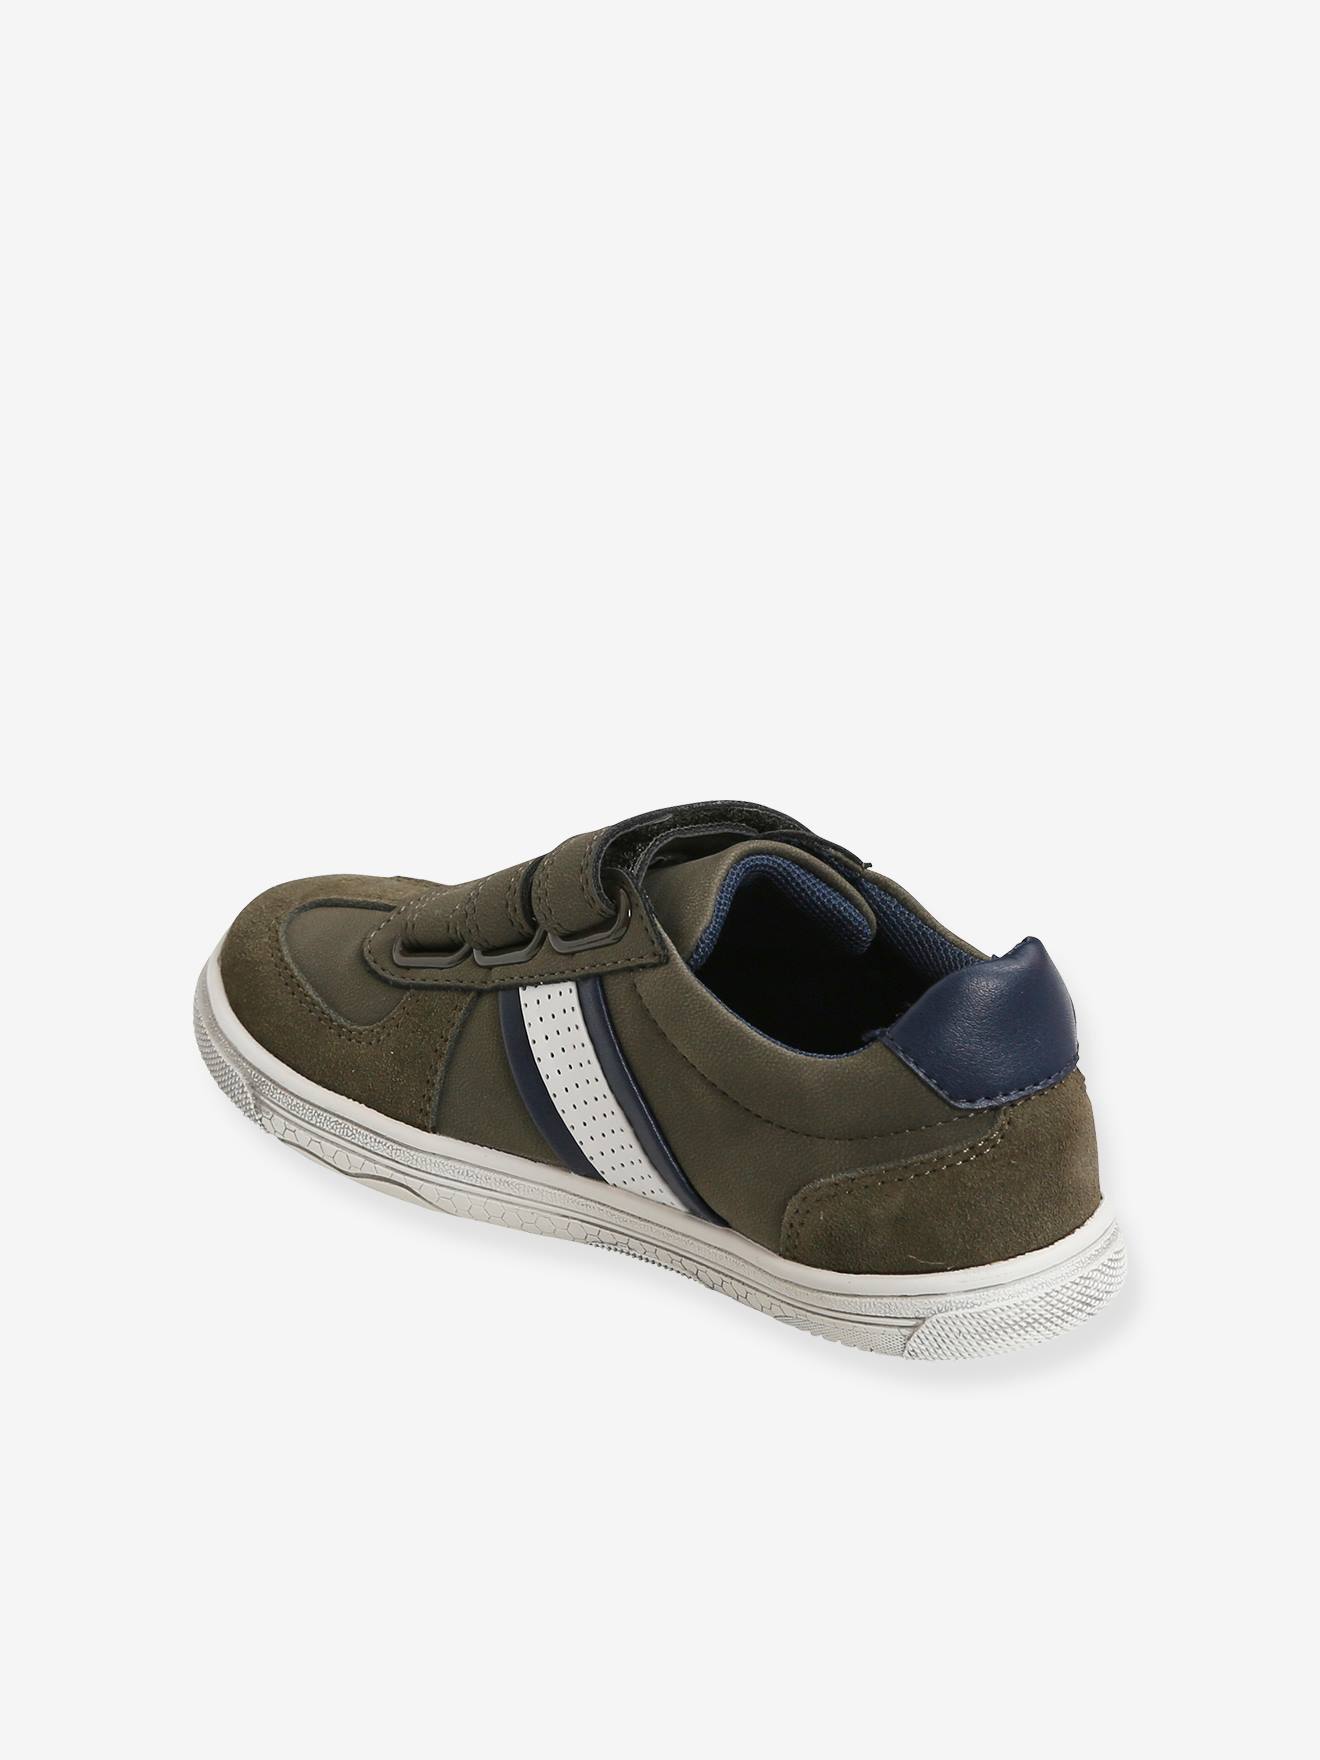 Trainers with Touch-Fastening Tab for Boys green dark Shoes